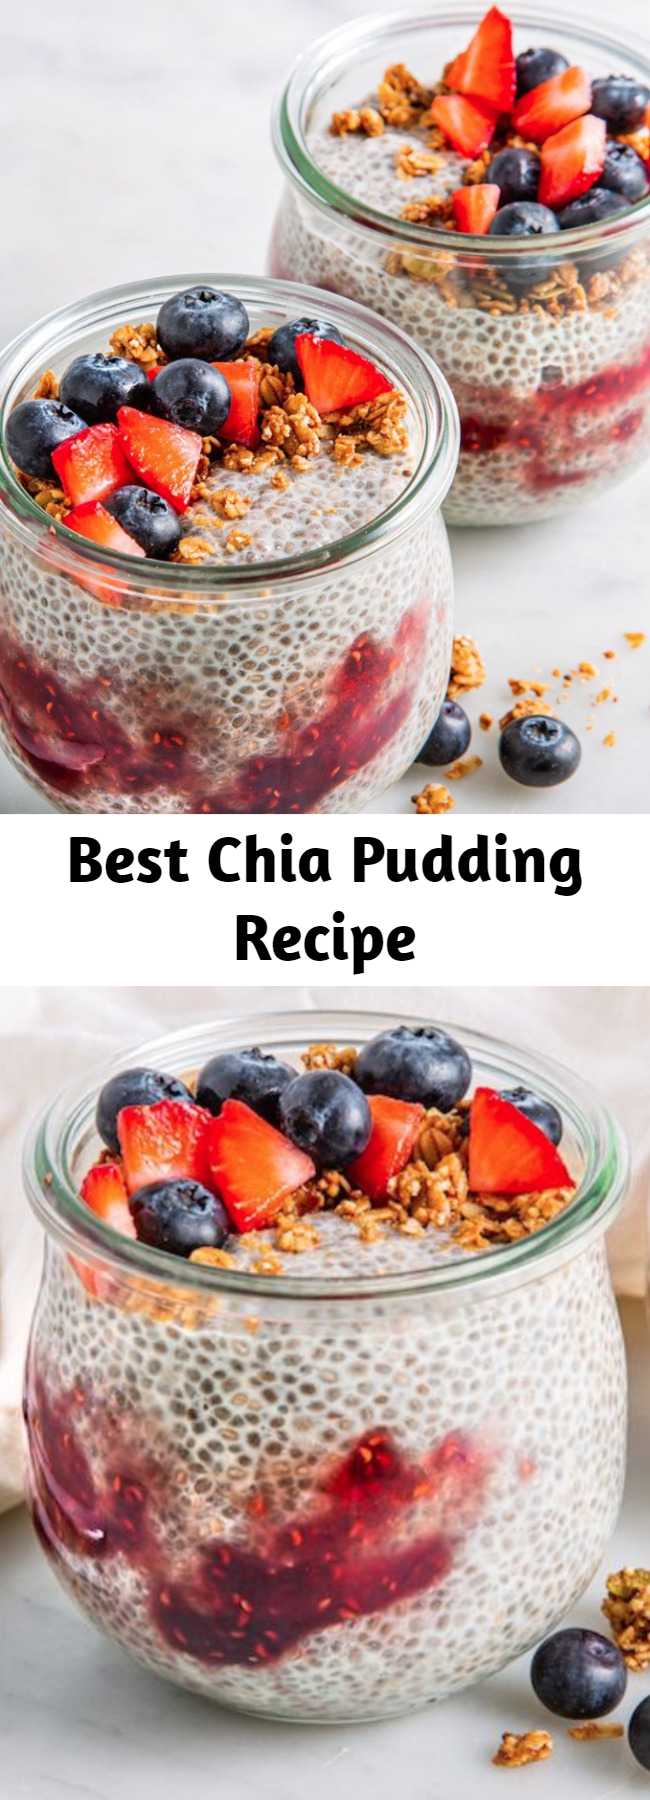 Best Chia Pudding Recipe - This Chia Pudding is perfect for breakfast, brunch, or a healthy dessert alternative any day. You're gonna have to find something else to feel guilty about.